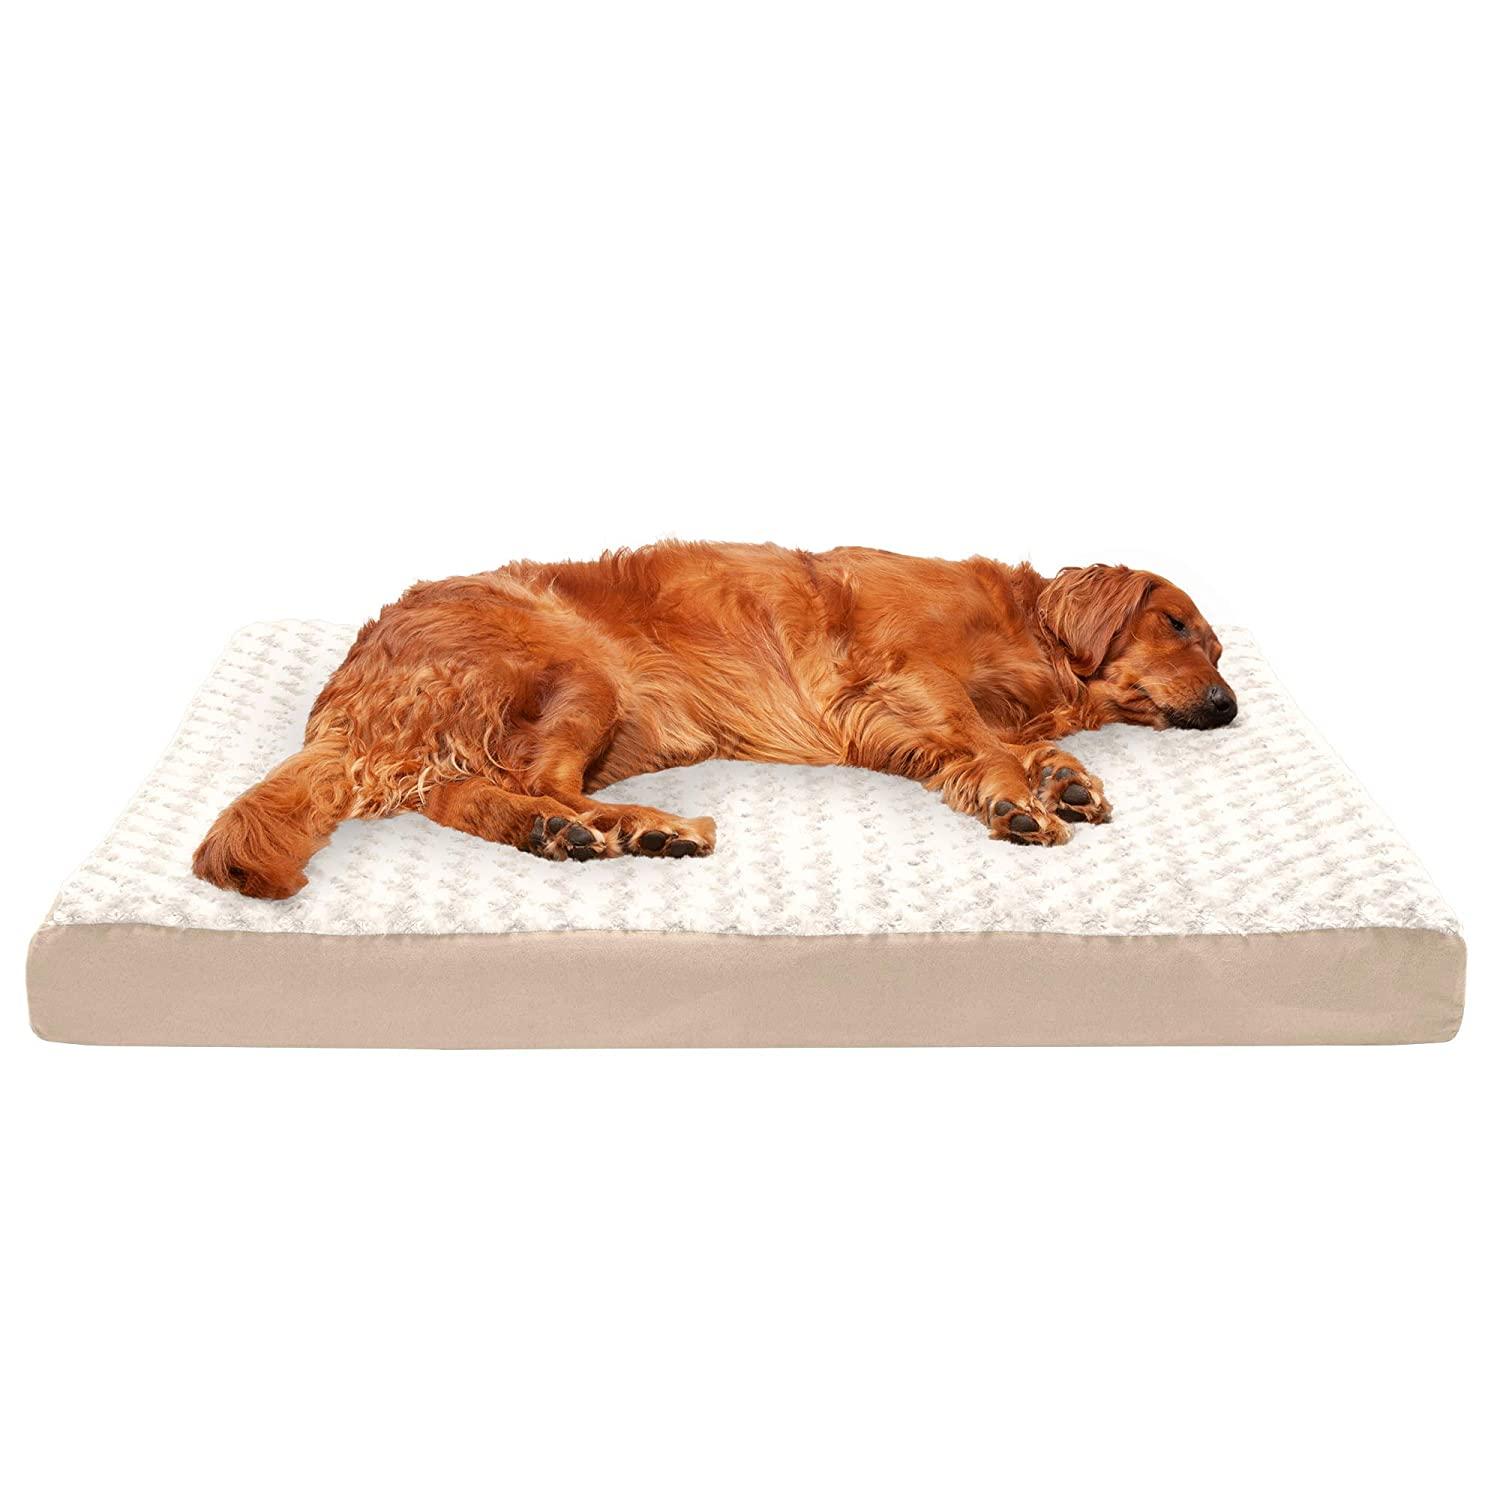 https://images.baxterboo.com/global/images/products/large/furhaven-ultra-plush-deluxe-memory-foam-pet-bed-chocolate-2319.jpg